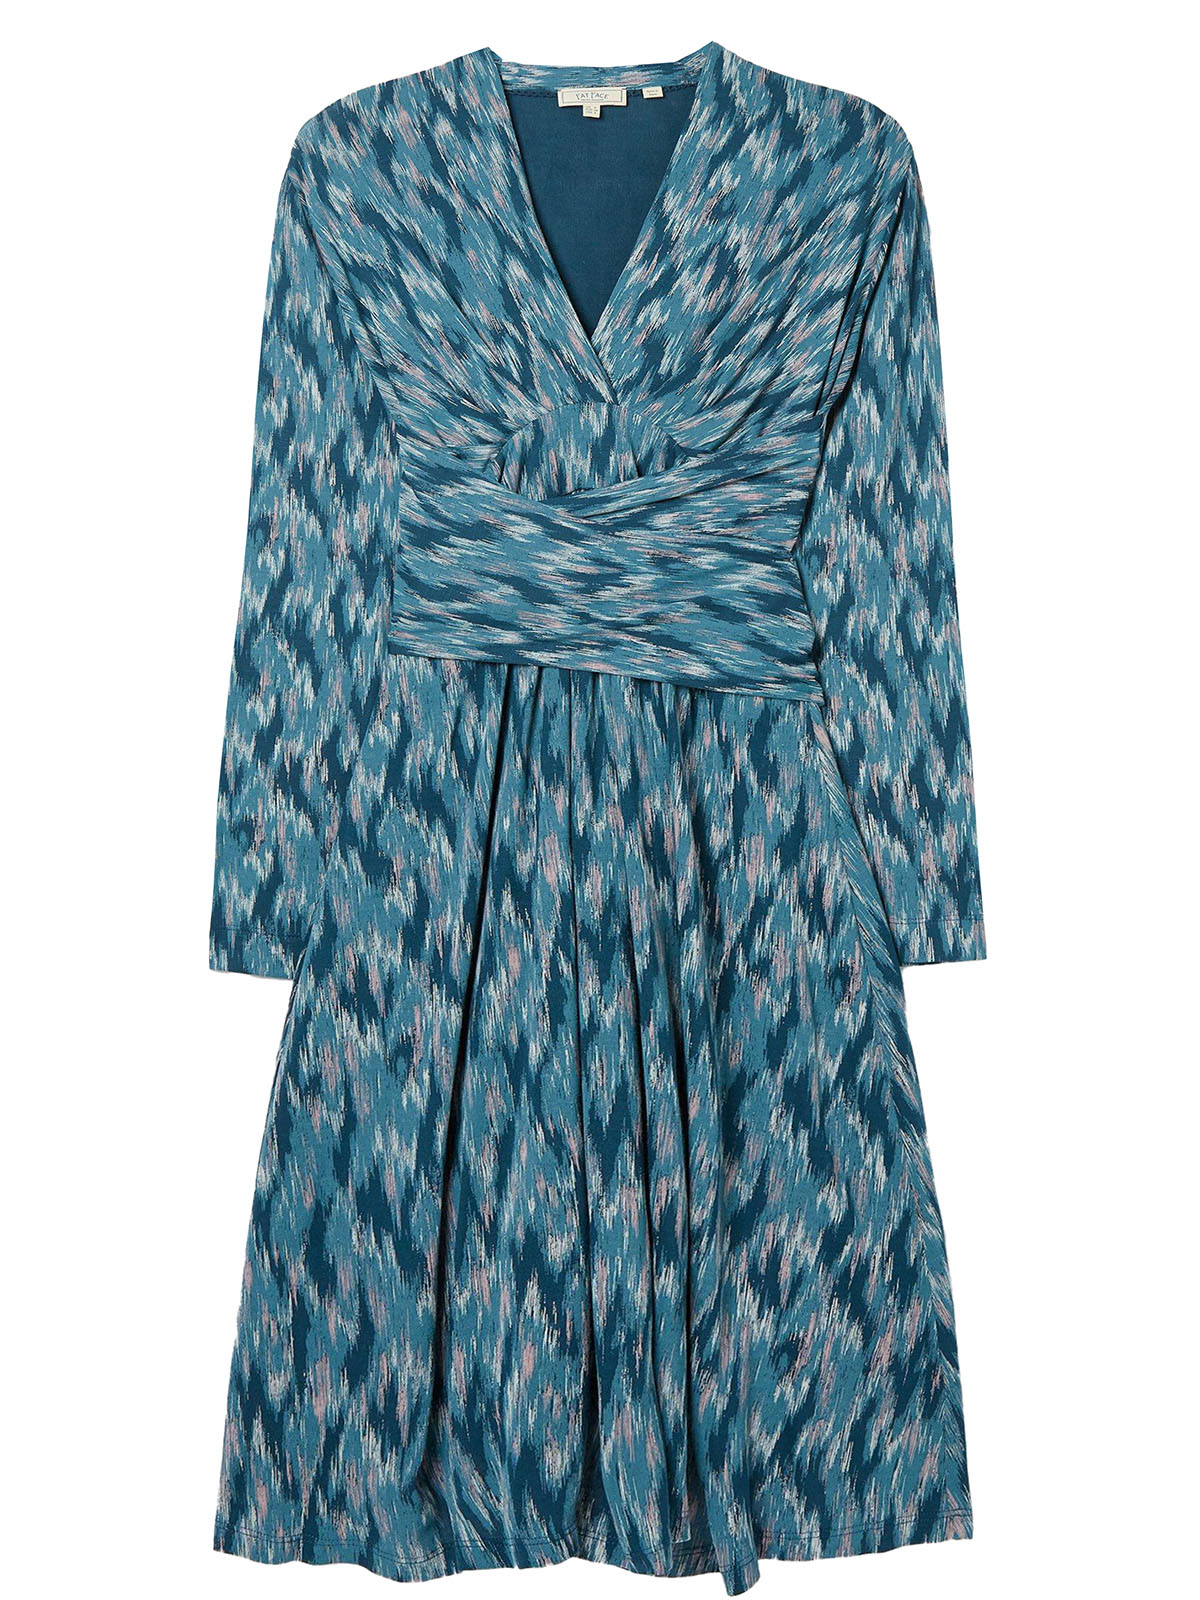 FAT FACE - - TEAL Delphine Ikat Jersey Dress - Size 10 to 16